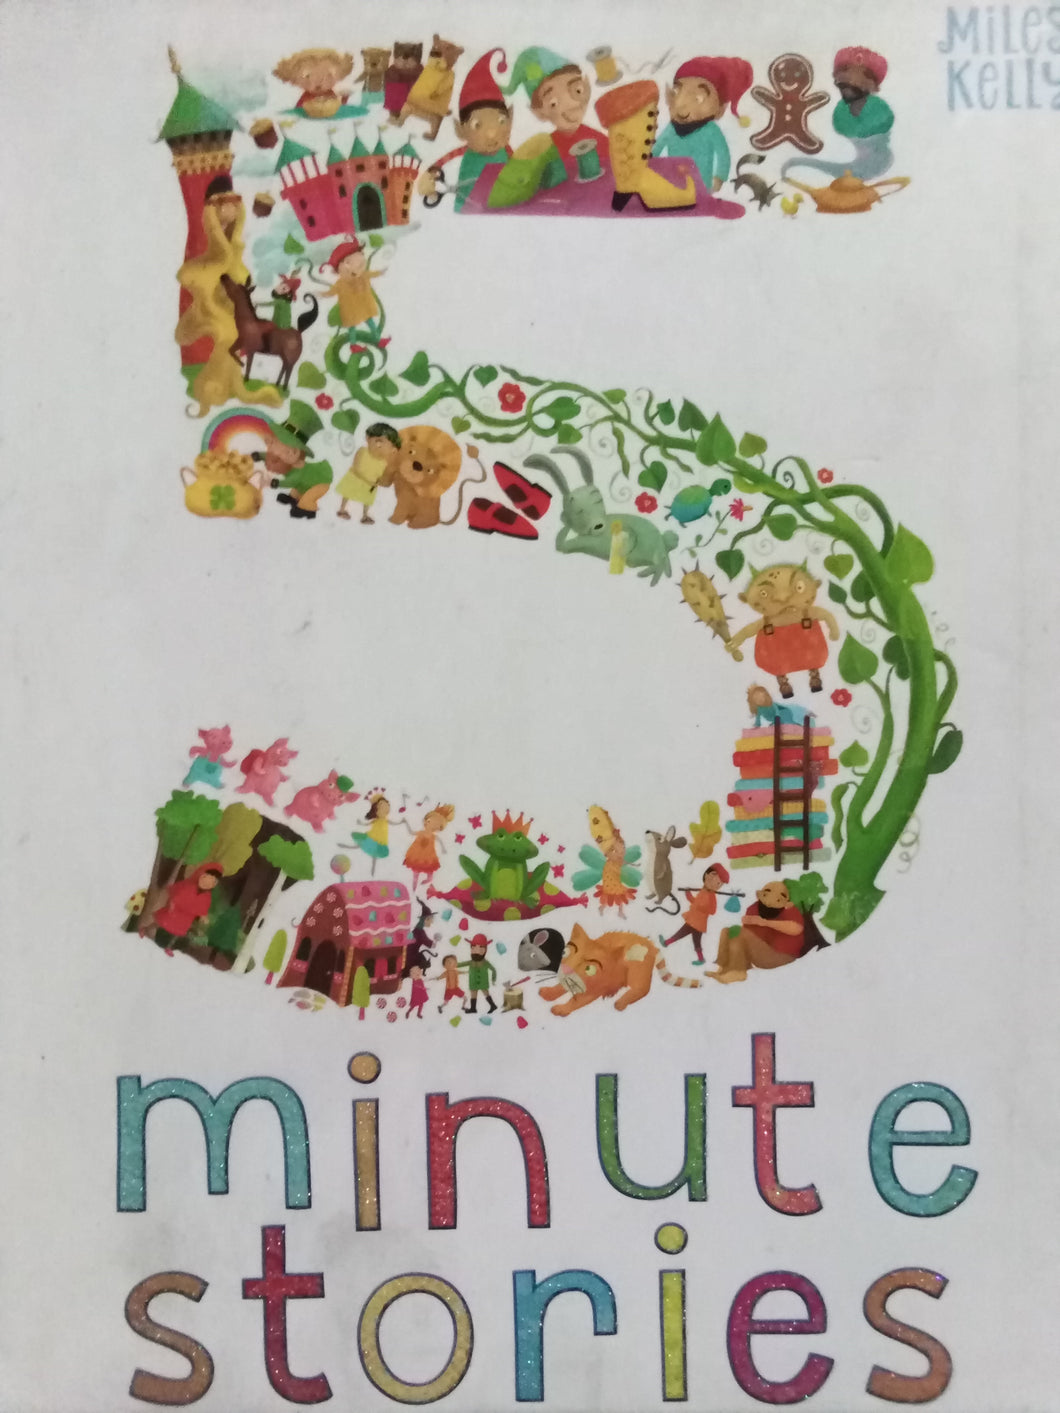 5 minute stories By miles kelly